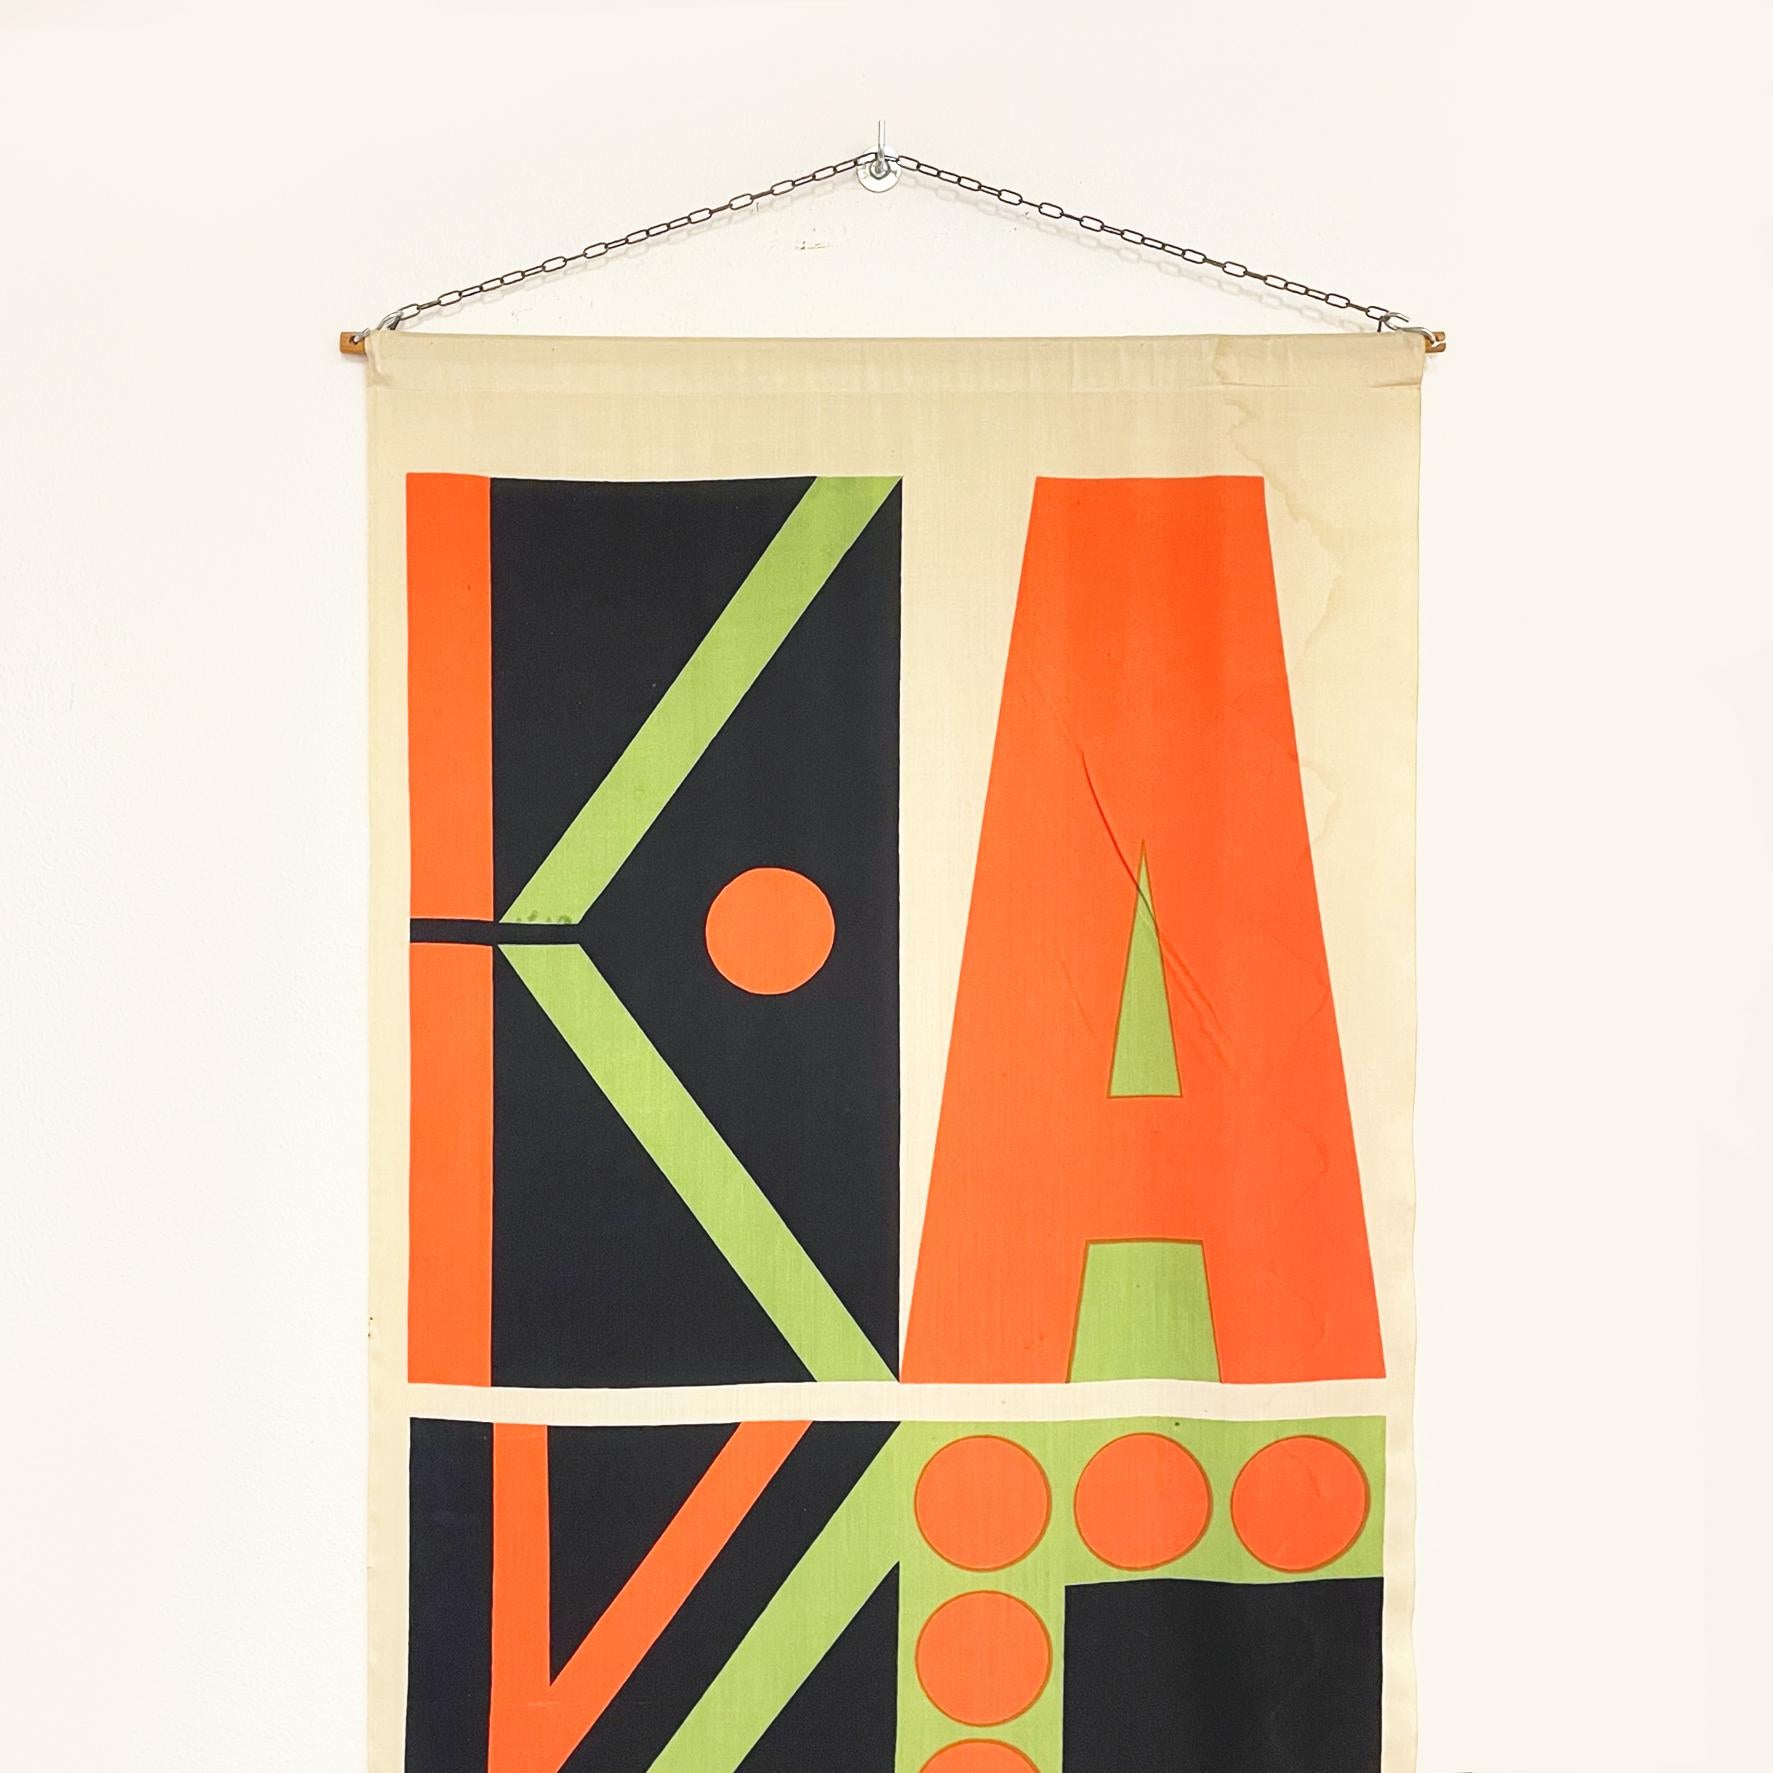 Italian Mid-Century Modern Wall print on fabric mod. Kakemono by Giulio Confalonieri, 1900-1950s
Wall print on fabric mod. Kakemono, supported by two round section wooden rods at the top and bottom. The Kakemono writing, divided by syllables, is